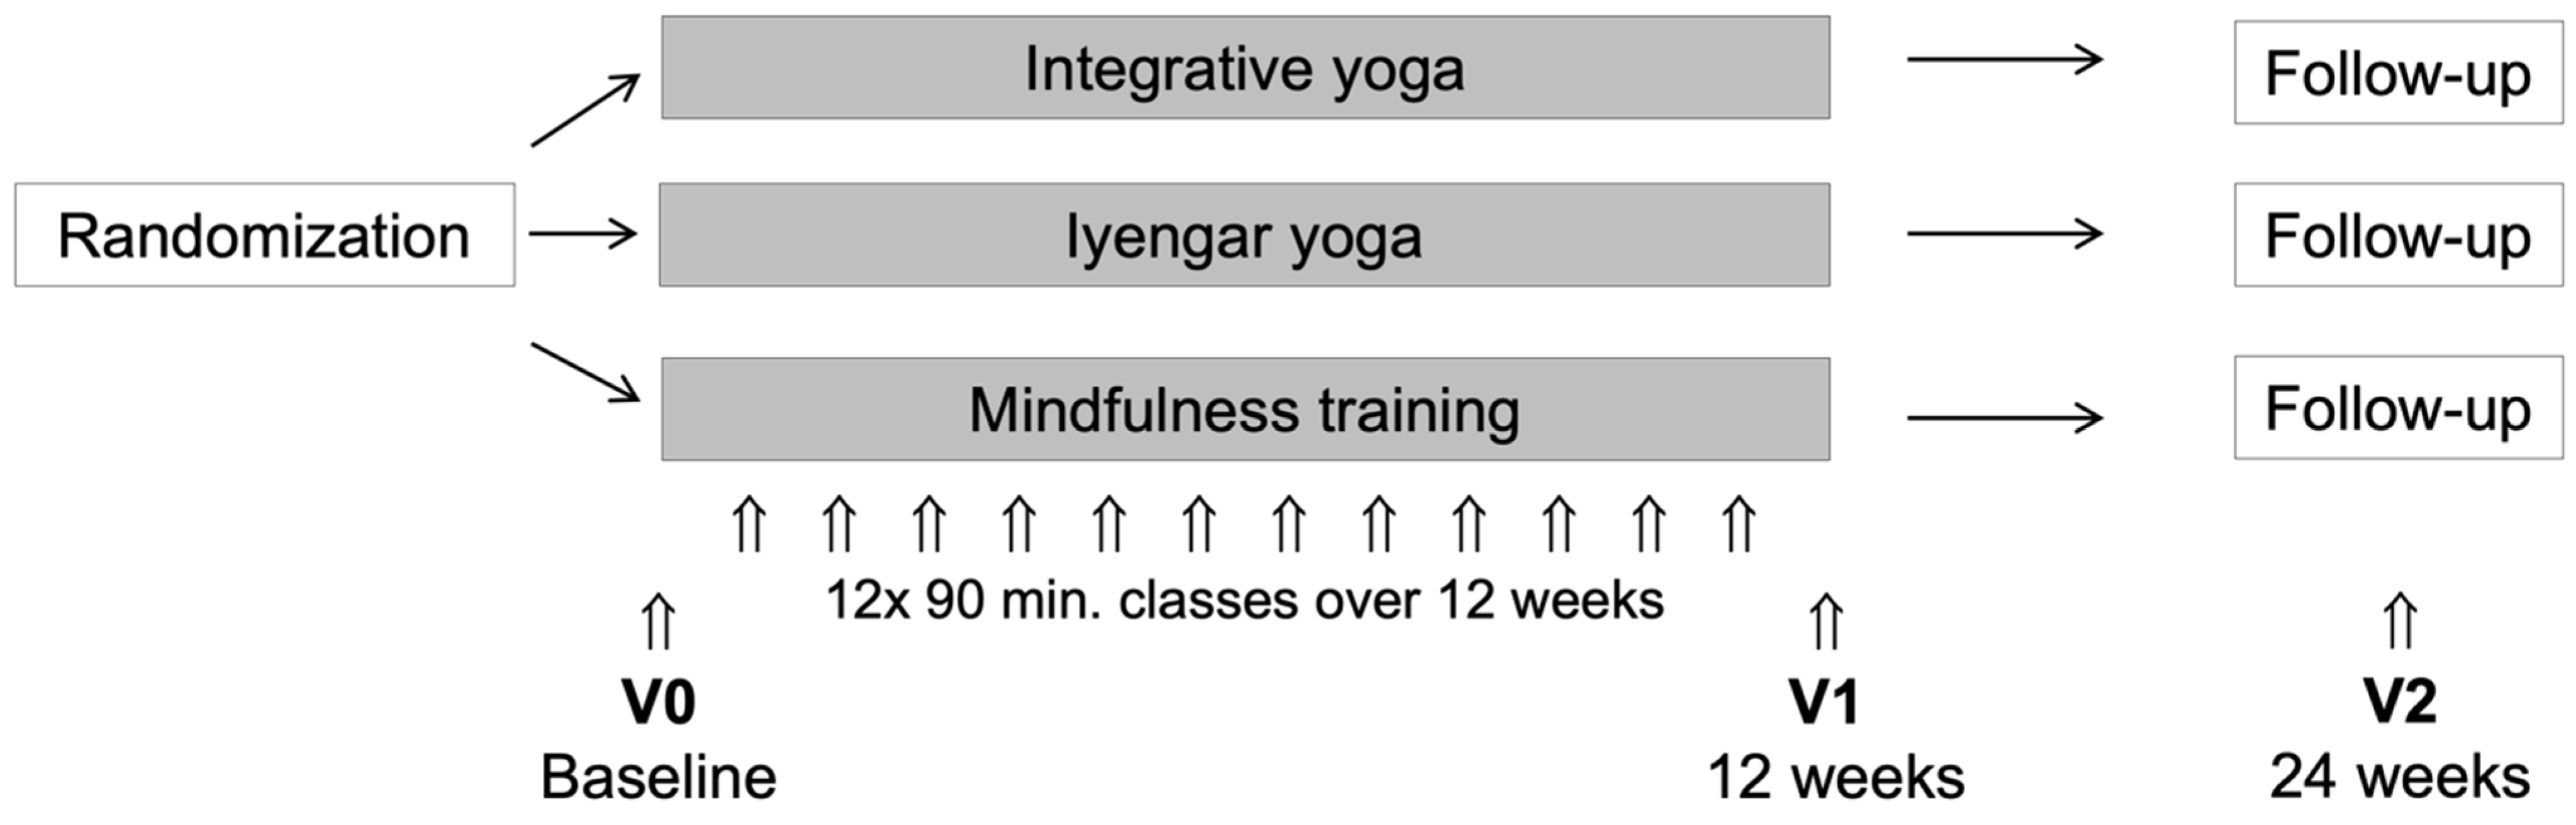 JCM | Free Full-Text | Stress Reduction by Yoga versus Mindfulness Training  in Adults Suffering from Distress: A Three-Armed Randomized Controlled  Trial including Qualitative Interviews (RELAX Study)